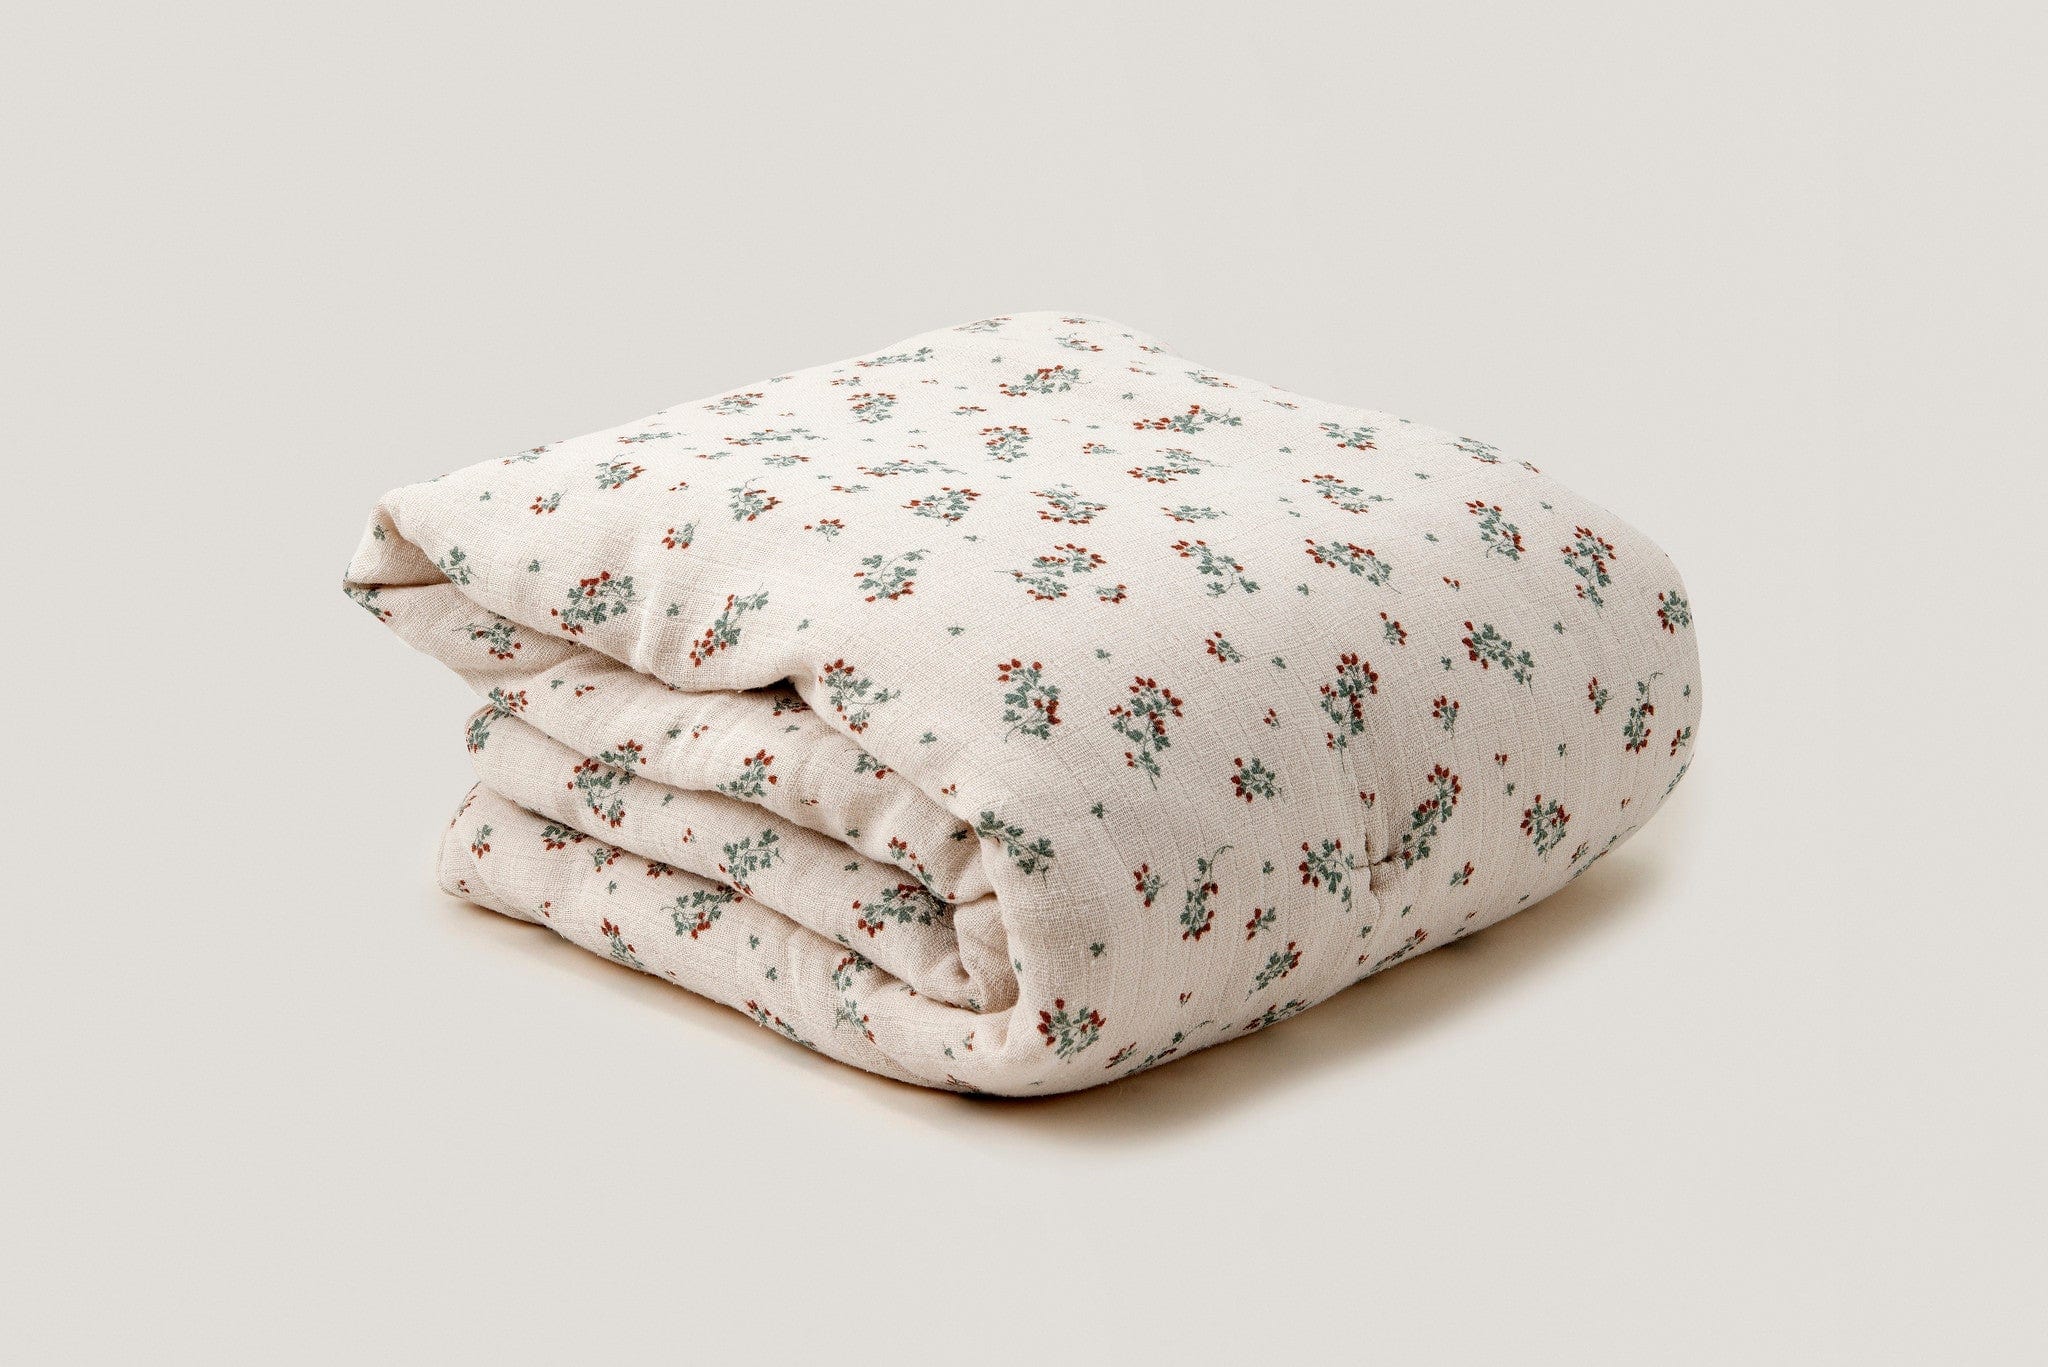 Soft filled cotton muslin blanket, with clover print